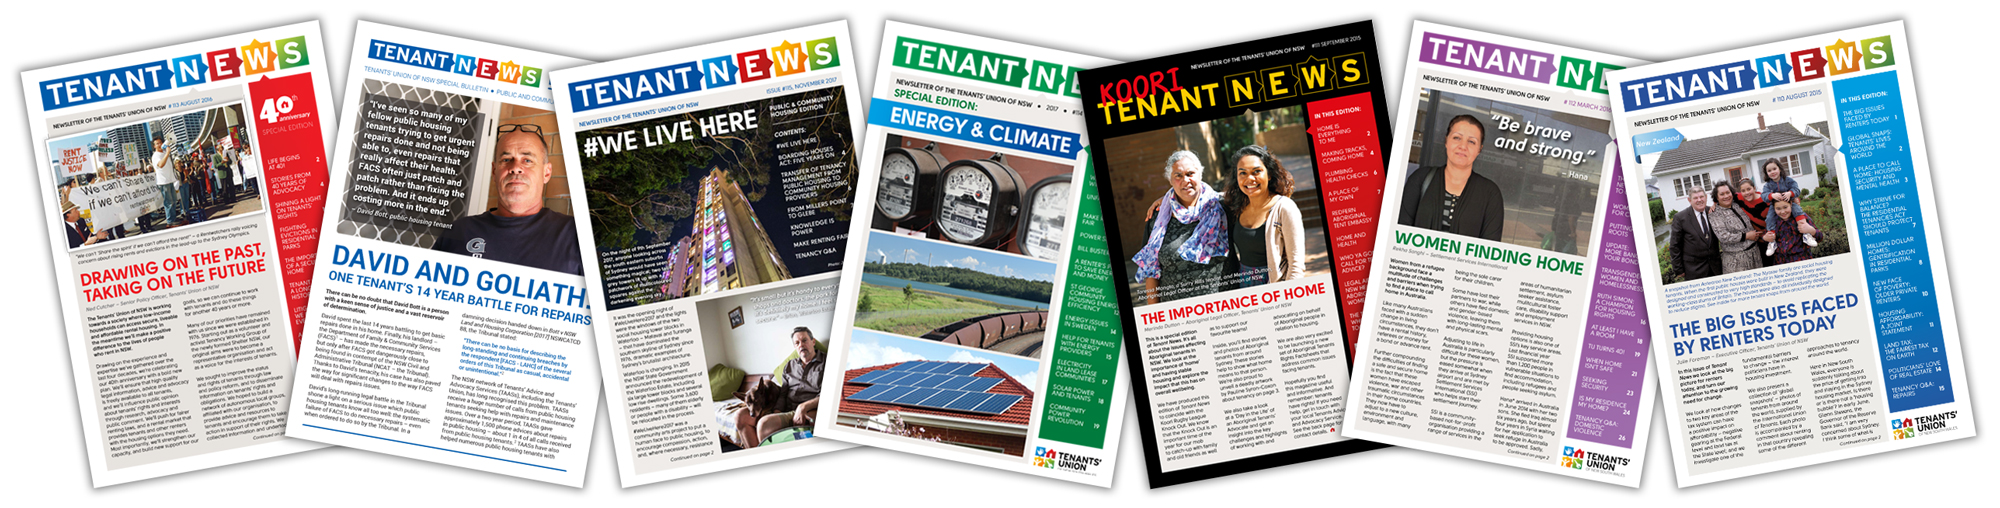 Tenant News covers